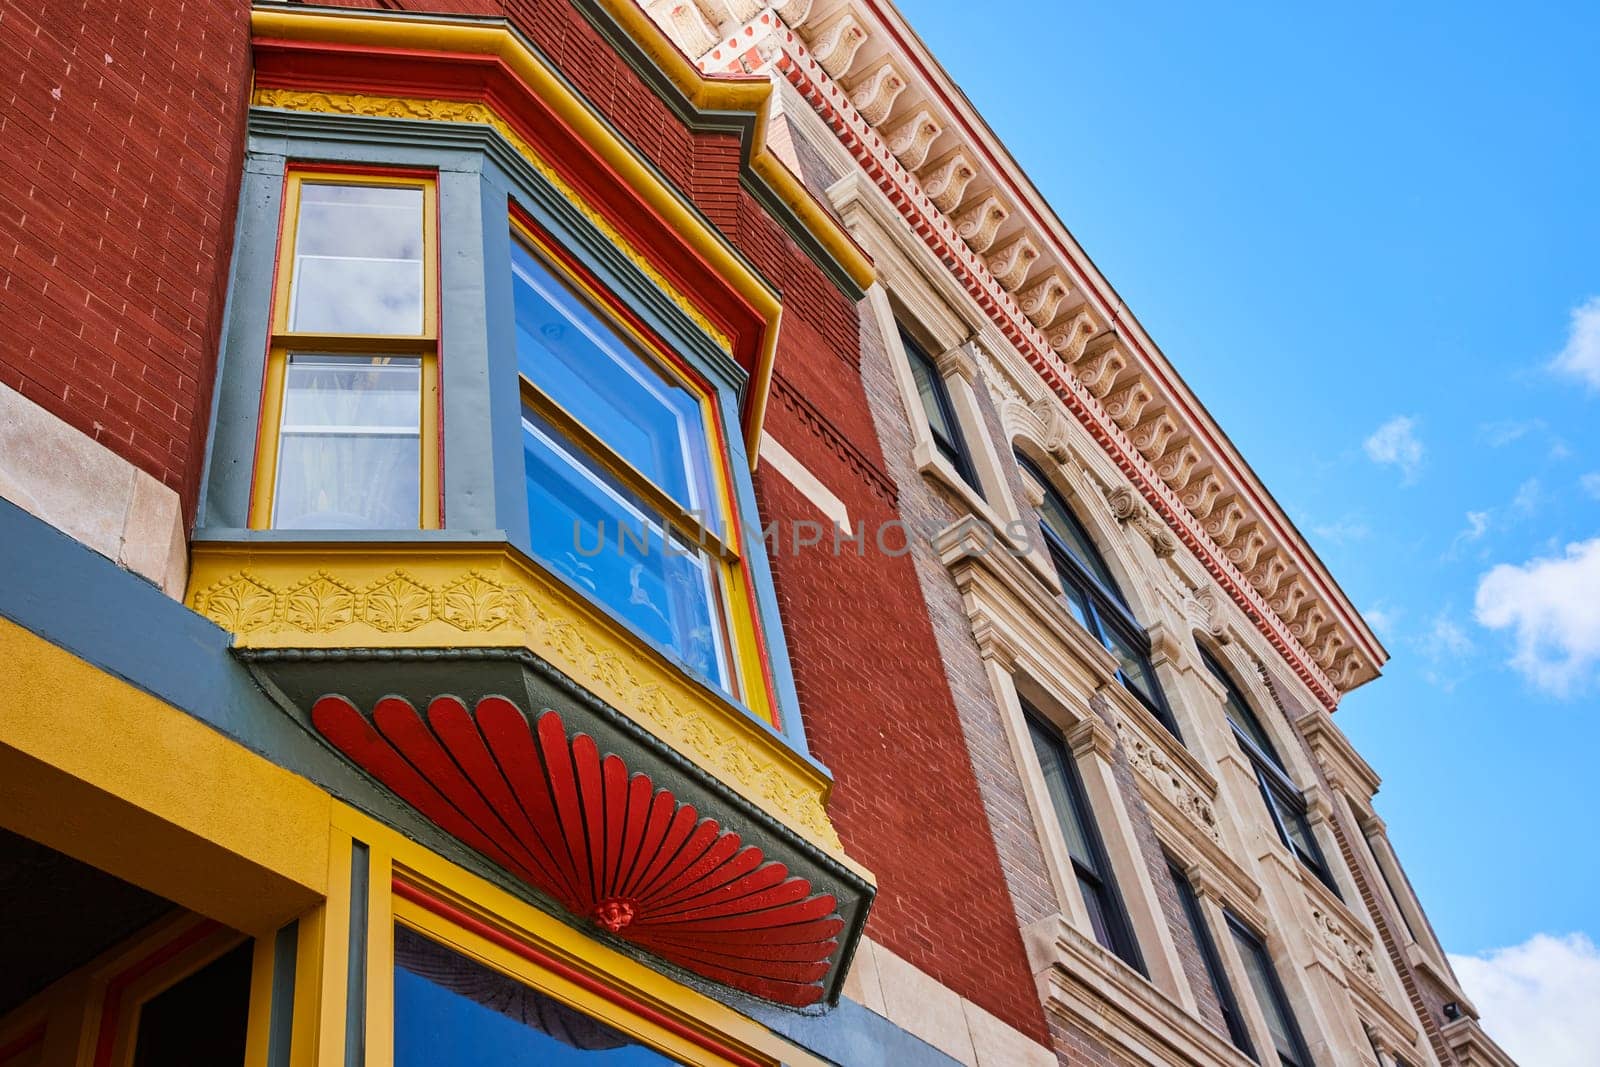 Colorful Urban Facades and Historic Architecture, Upward View by njproductions